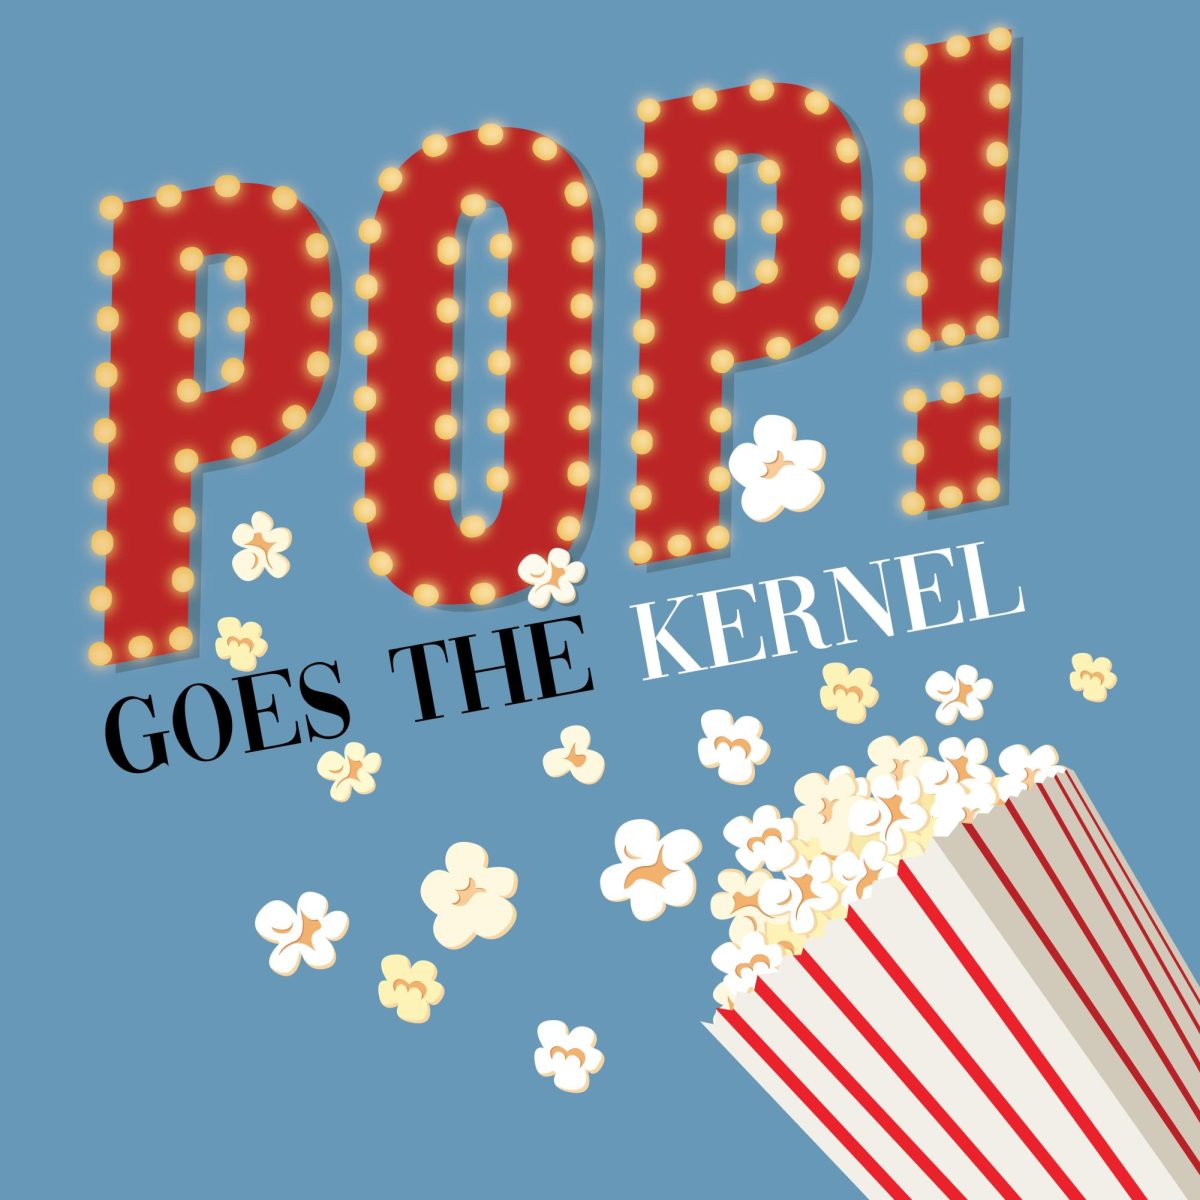 POP! goes the Kernel: Ariana Grande’s ‘eternal sunshine’ and a pop culture Q&A